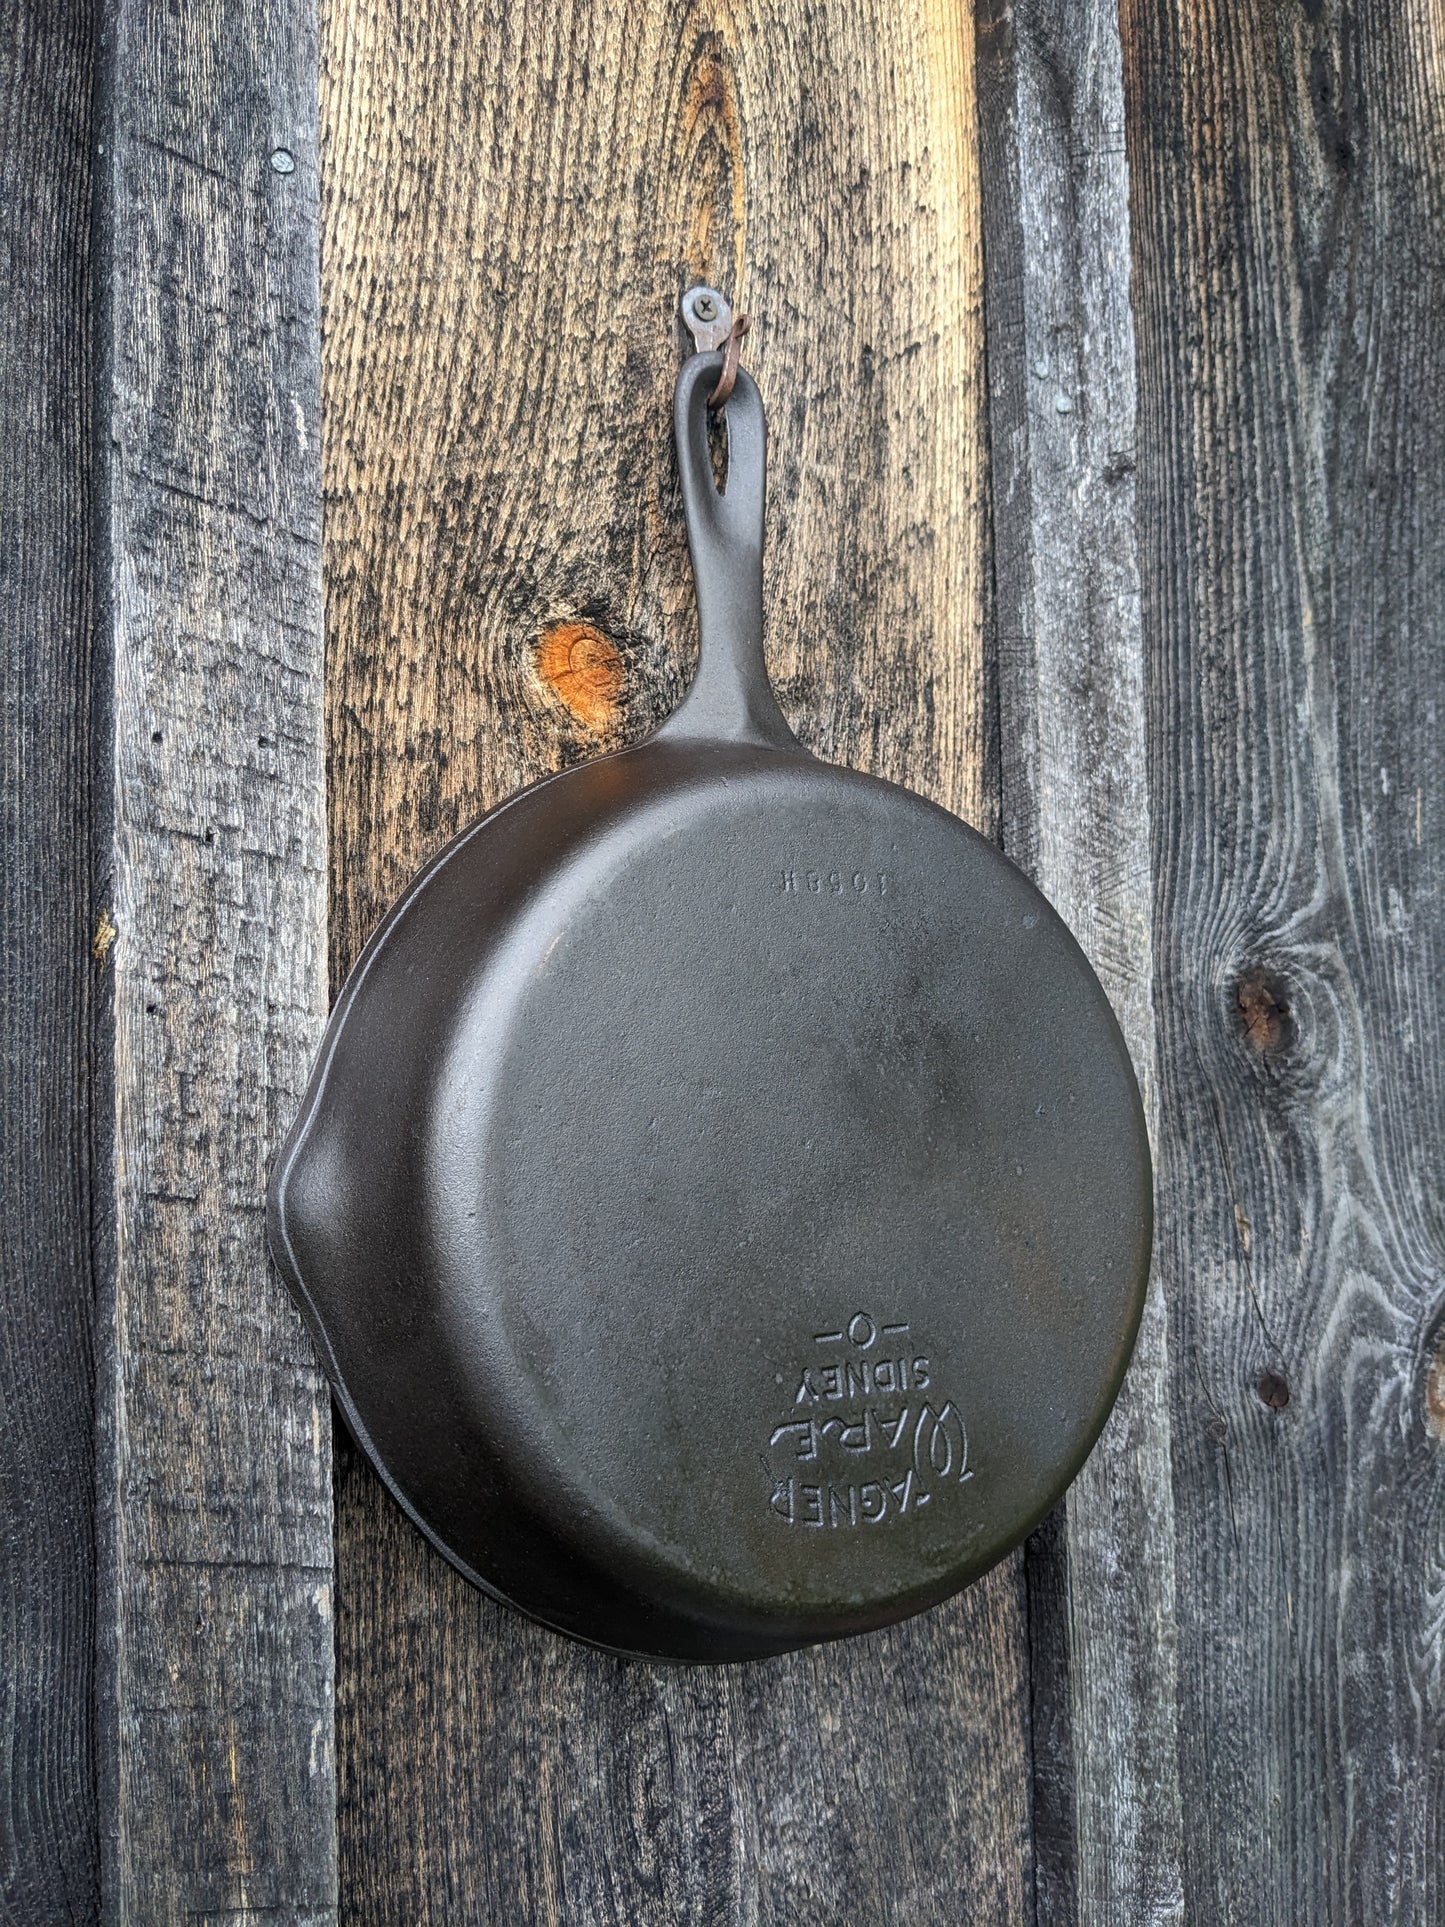 Wagner Ware #8 Cast Iron Skillet 1058 H